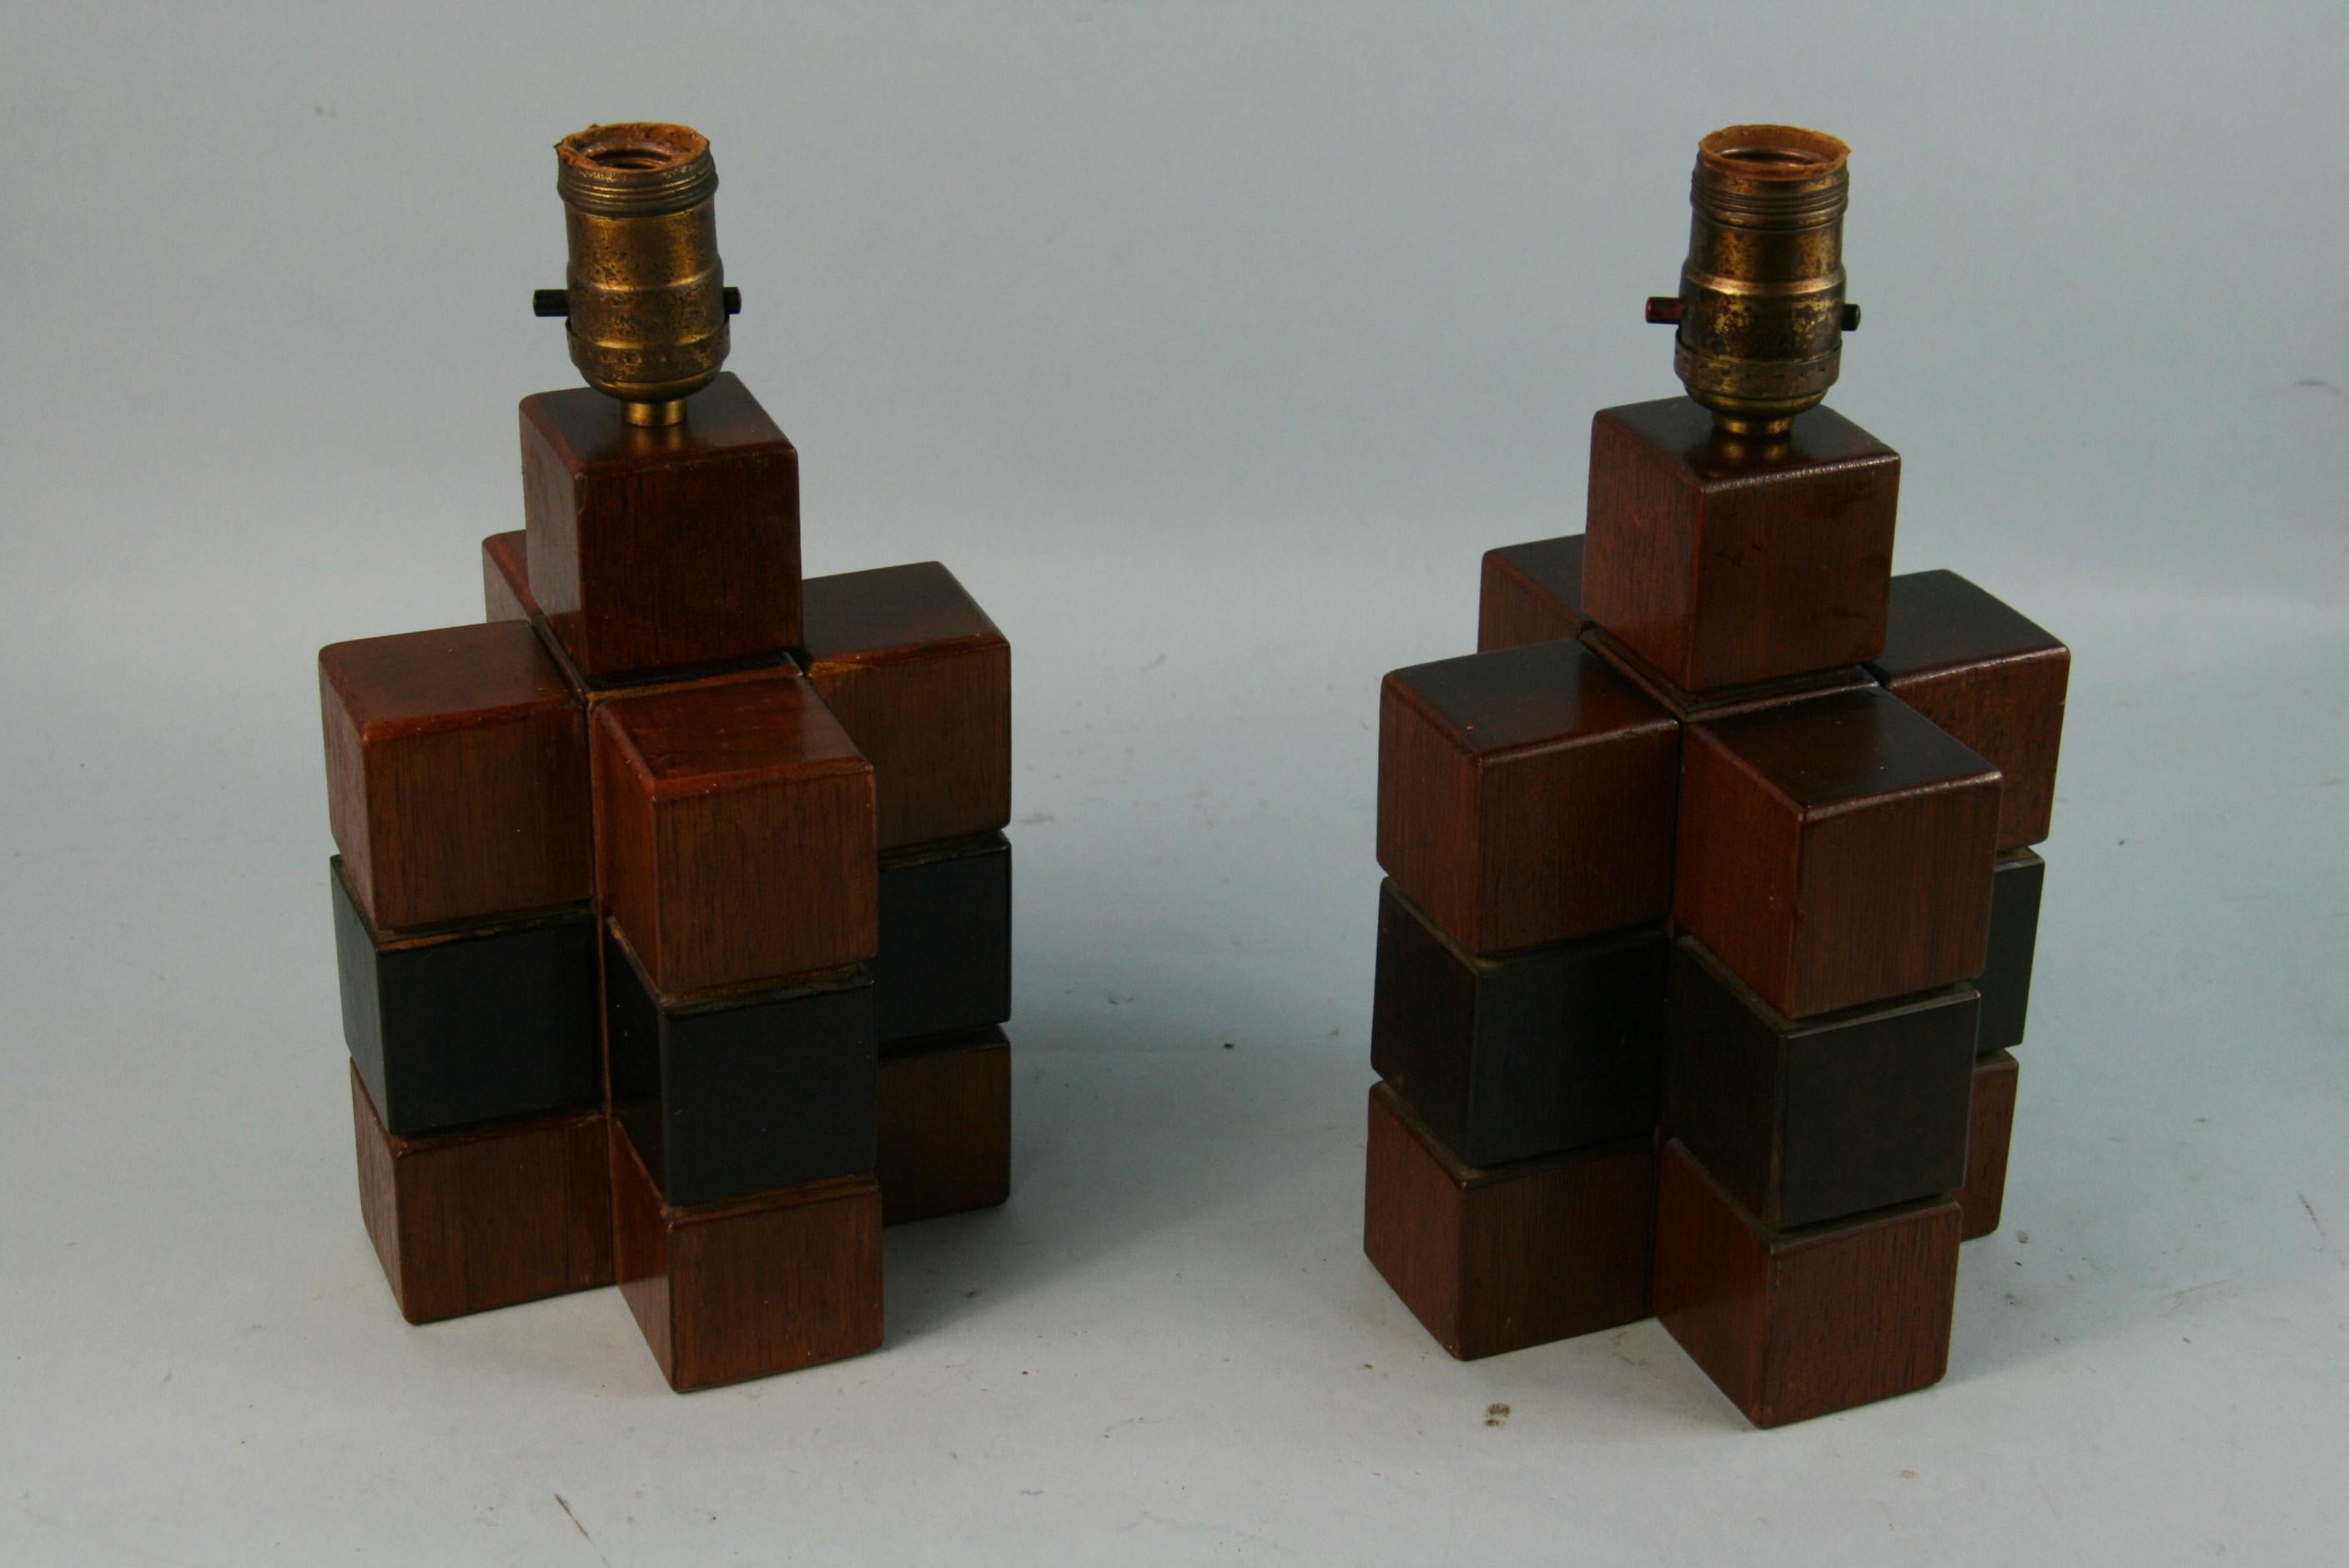 3-729 Pair artisan made one of a kind wood cube lamps.
Made in Sweden 1950